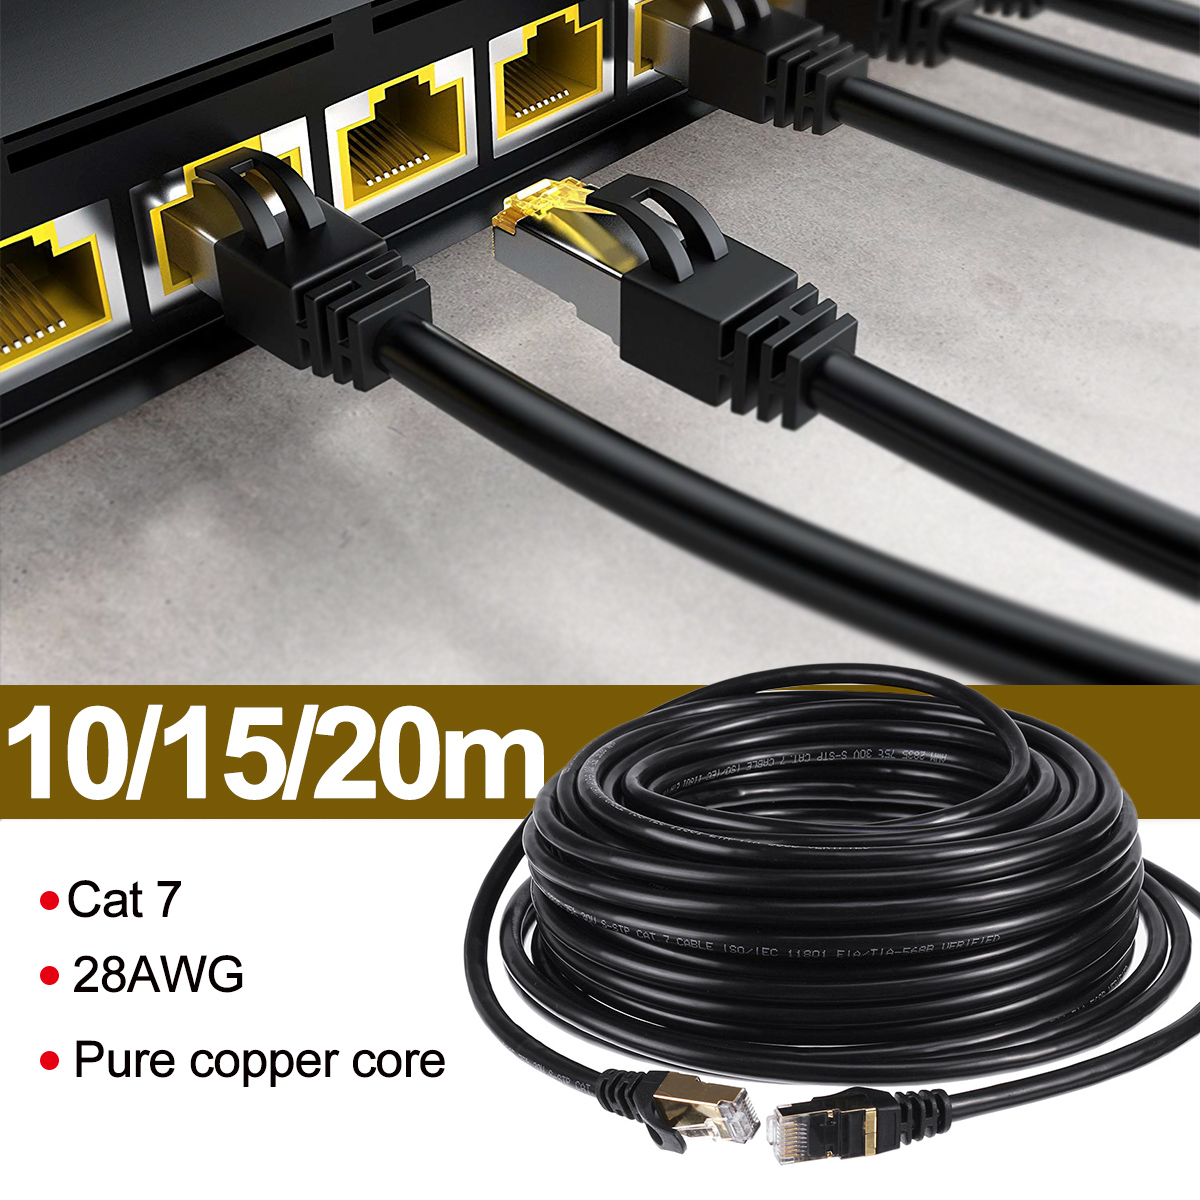 Black-Cat7-28AWG-High-Speed-Pure-Copper-Core-Networking-Cable-Cat7-Cable-LAN-Network-RJ45-Patch-Cord-1621196-1